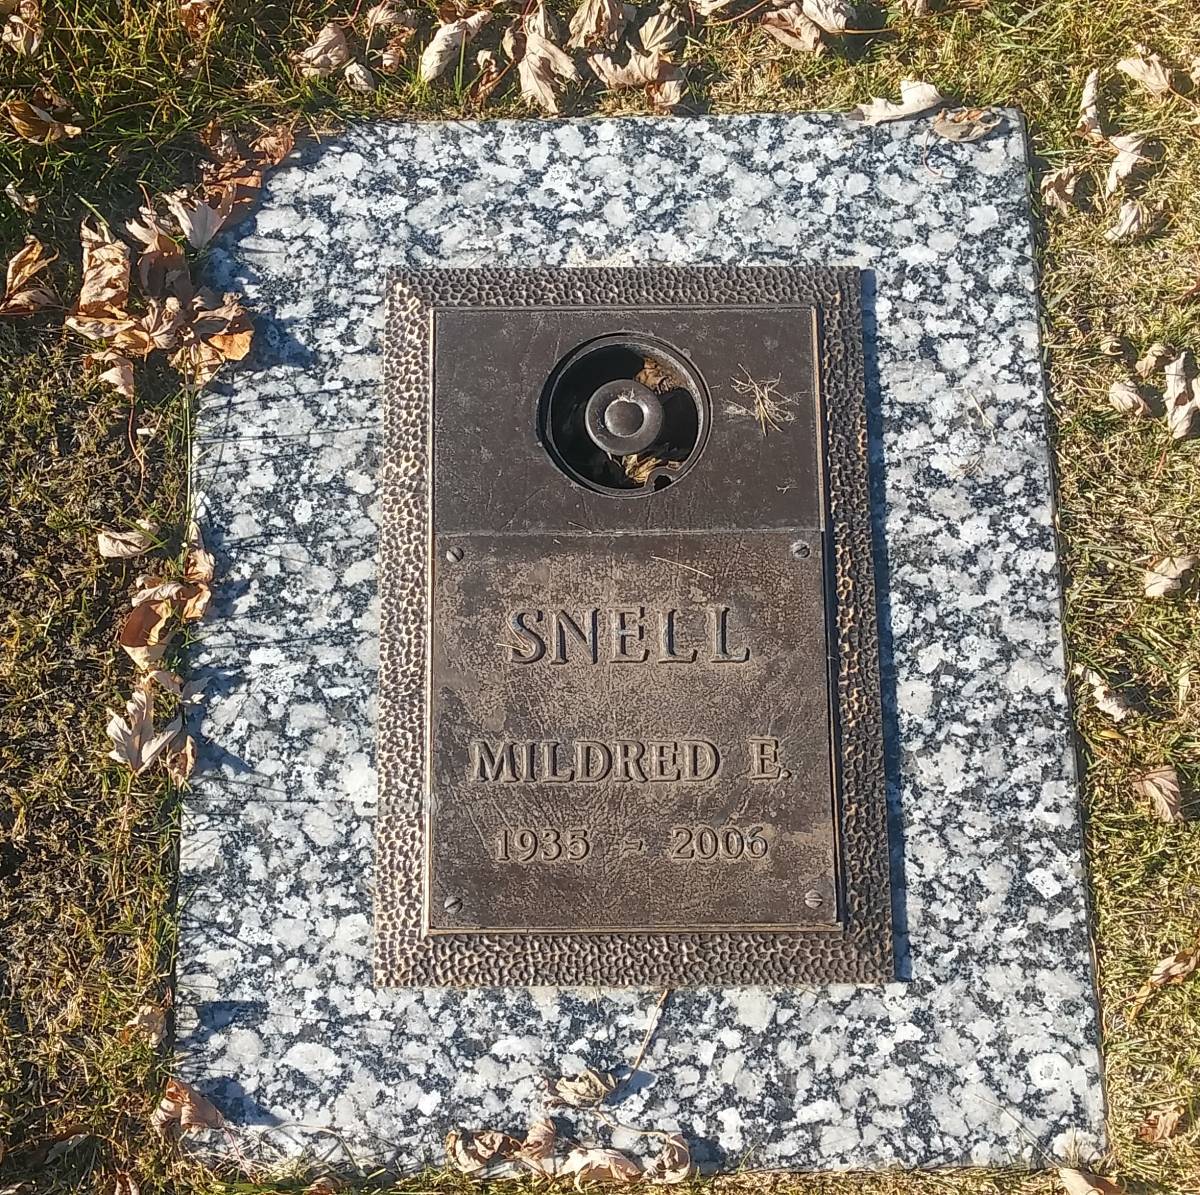 Picture - Marker for Mildred Snell